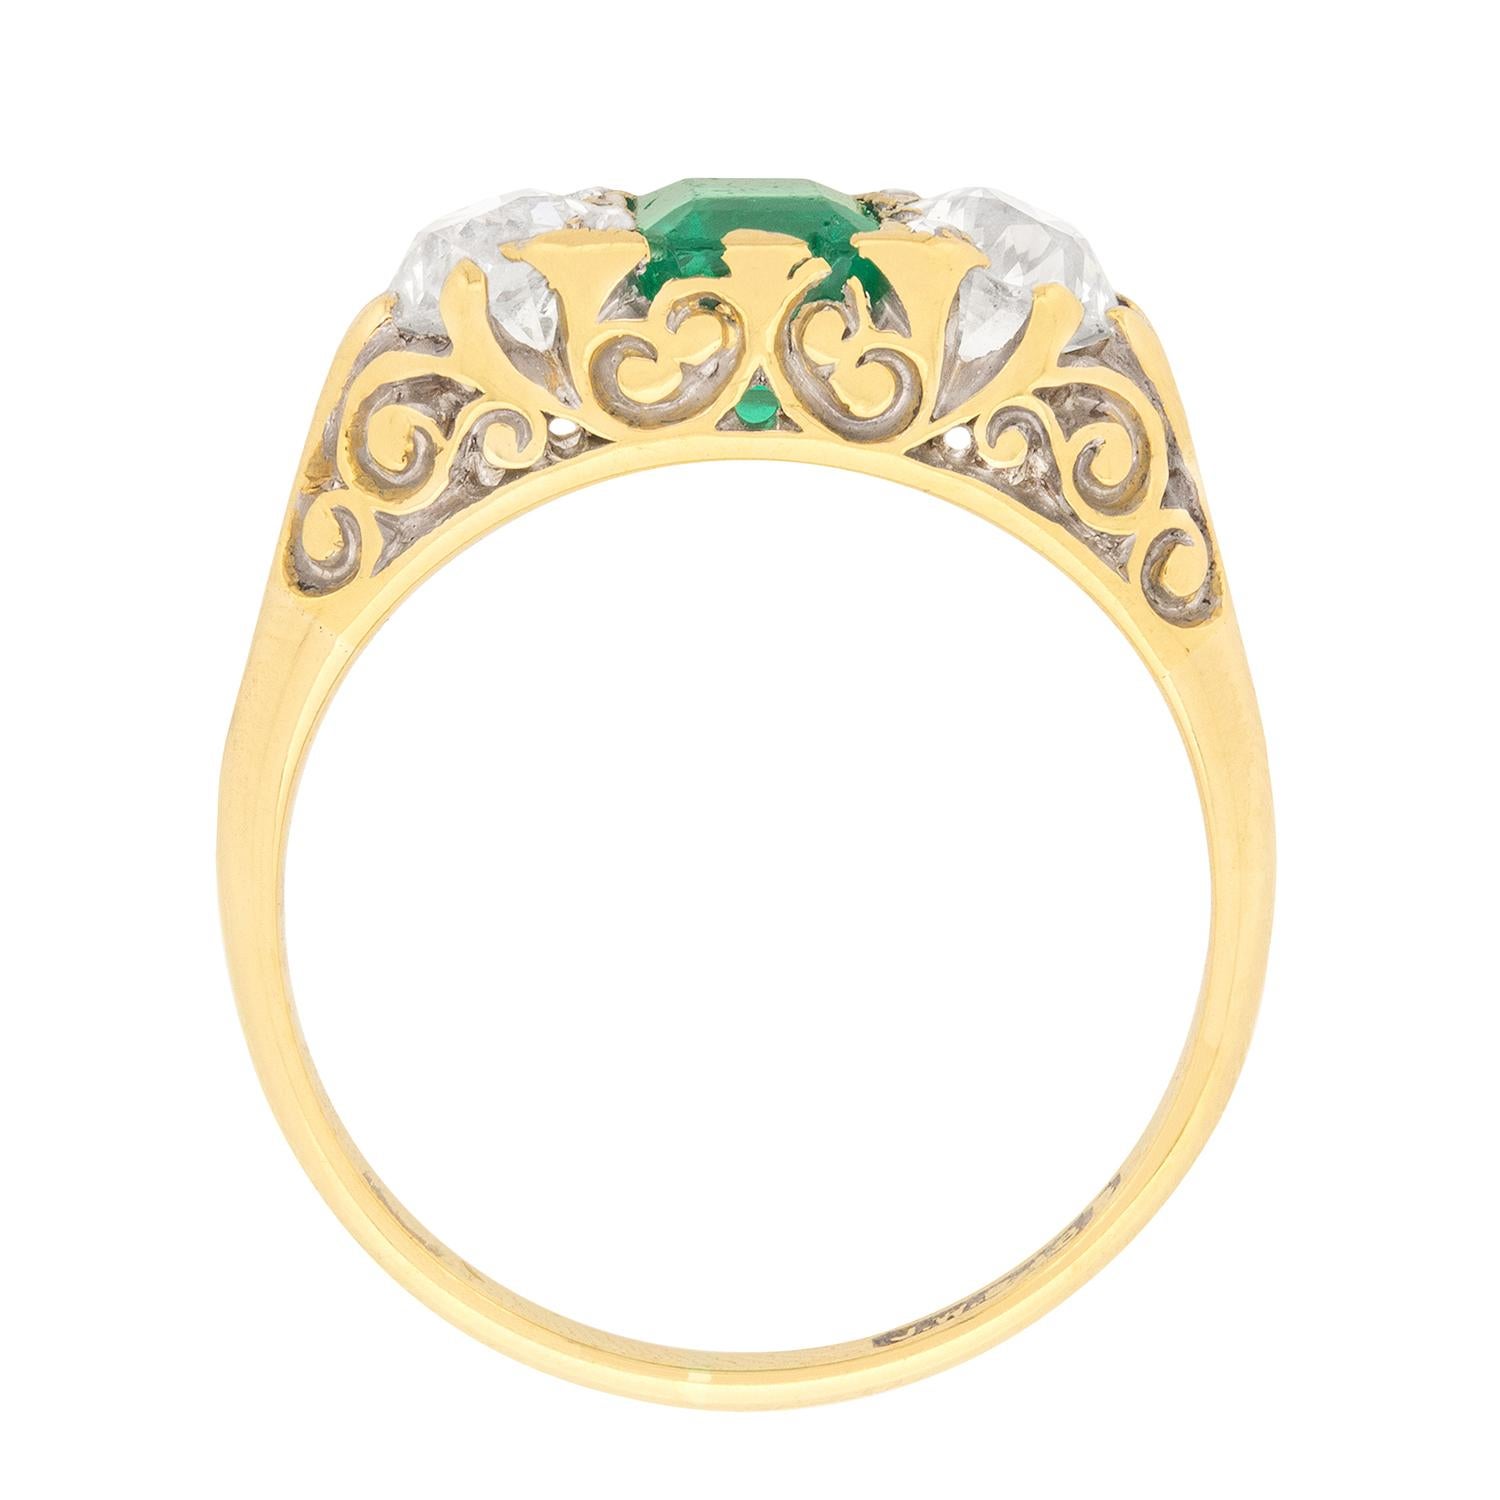 A vibrant 0.88 carat emerald is flanked by two 0.50 carat old cut diamonds in this Victorian ring. The emerald is certified to be natural and of Colombian origin by the Gem & Pearl Laboratory. The diamonds are G colour and VS2 clarity. The setting